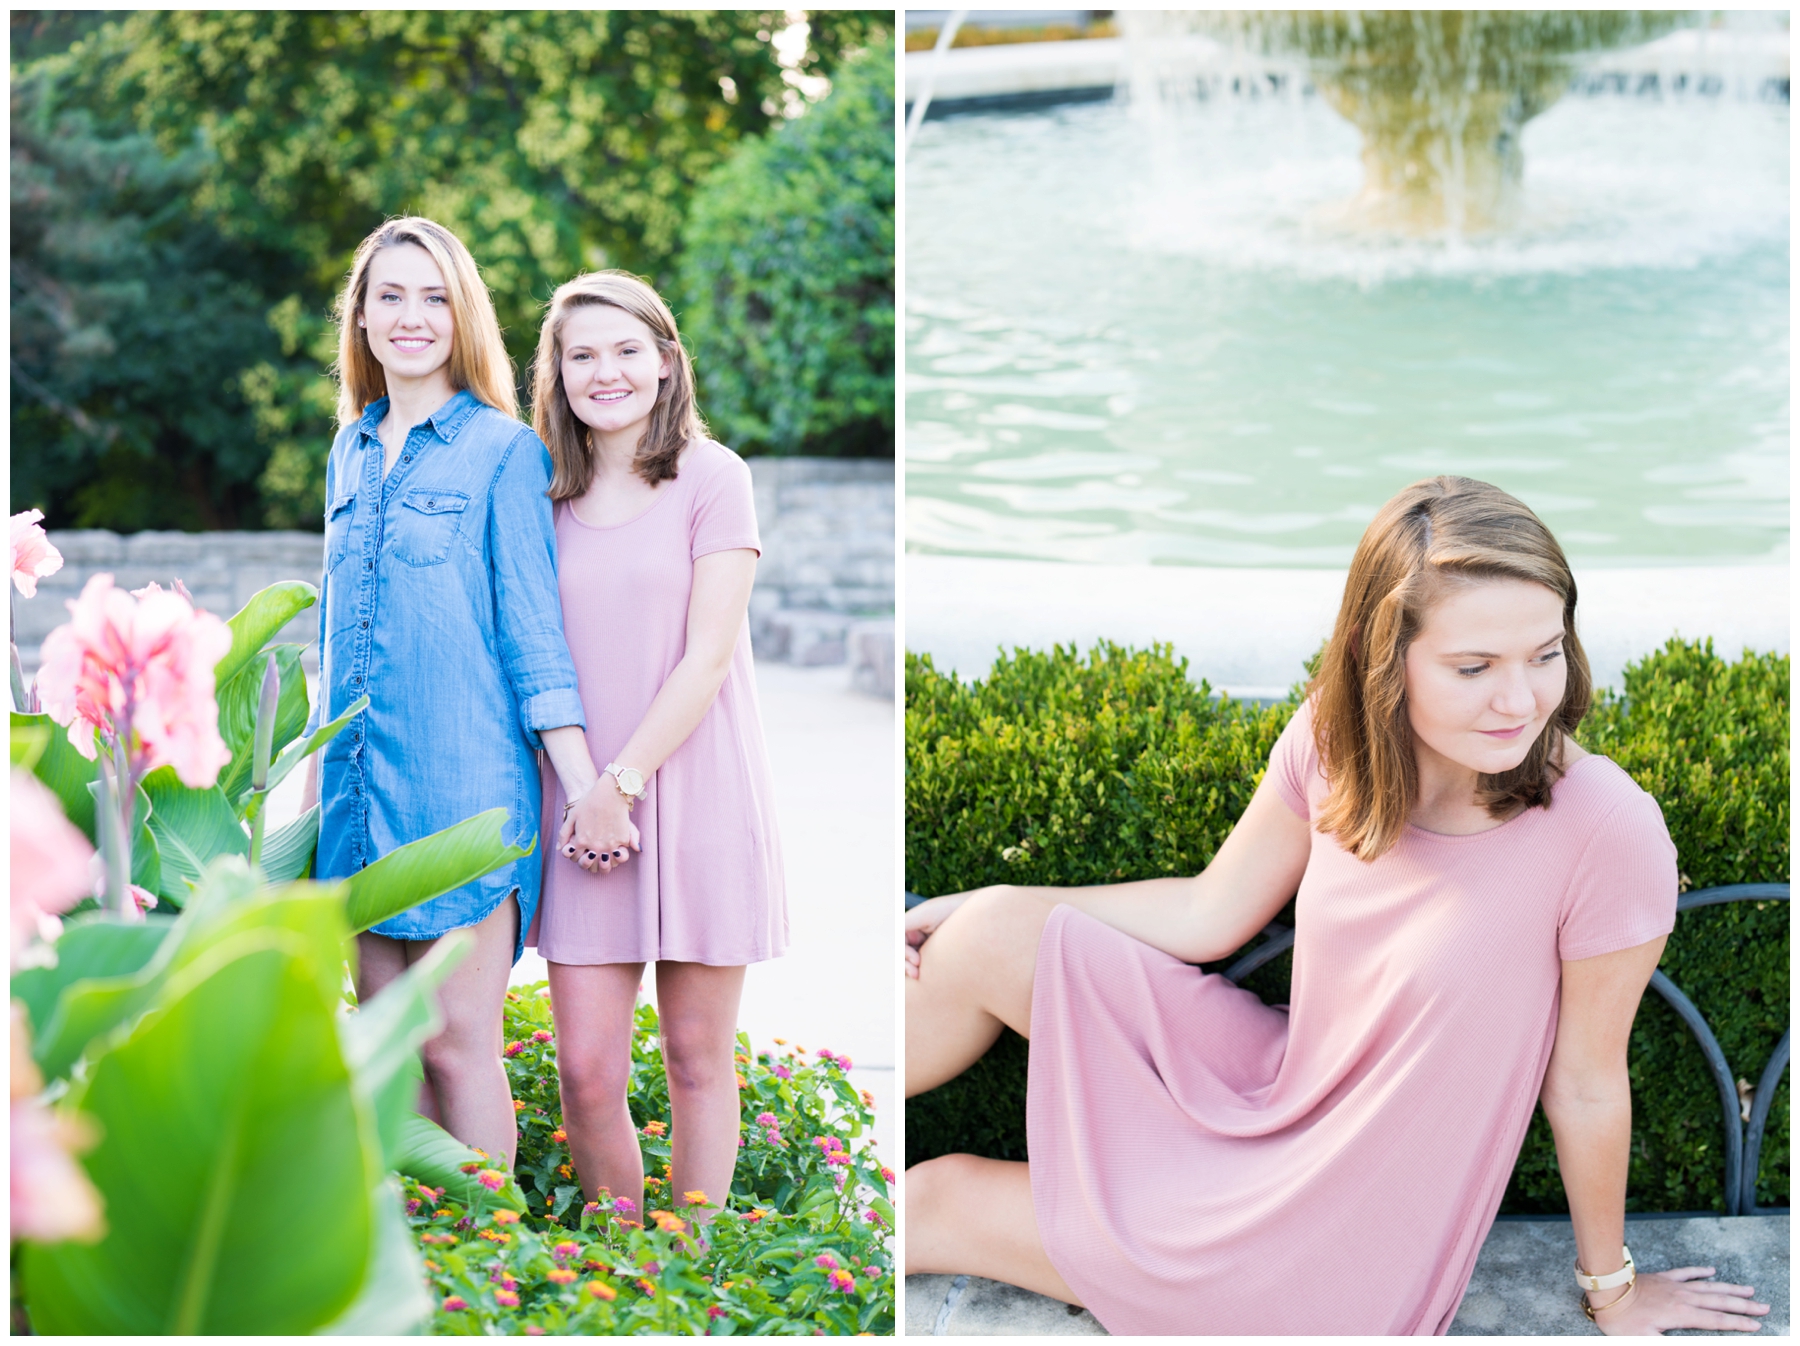 Sister-photoshoot-loose-park-kansas-city-with-flower-and-dog